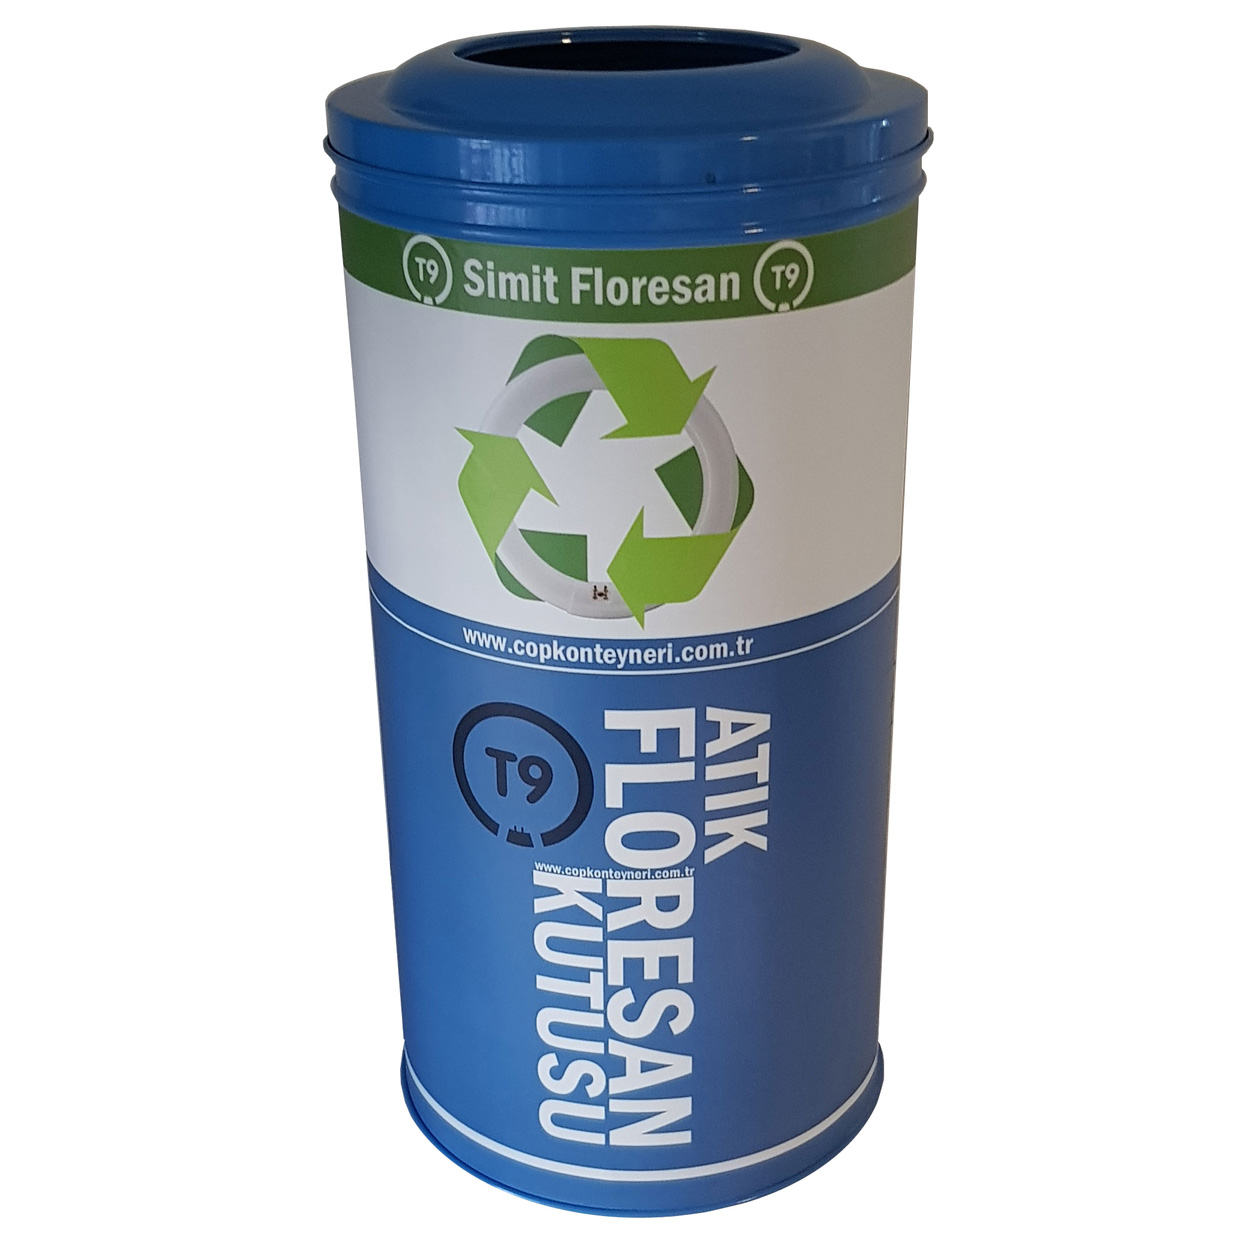 Recycle Box for flurescent T9